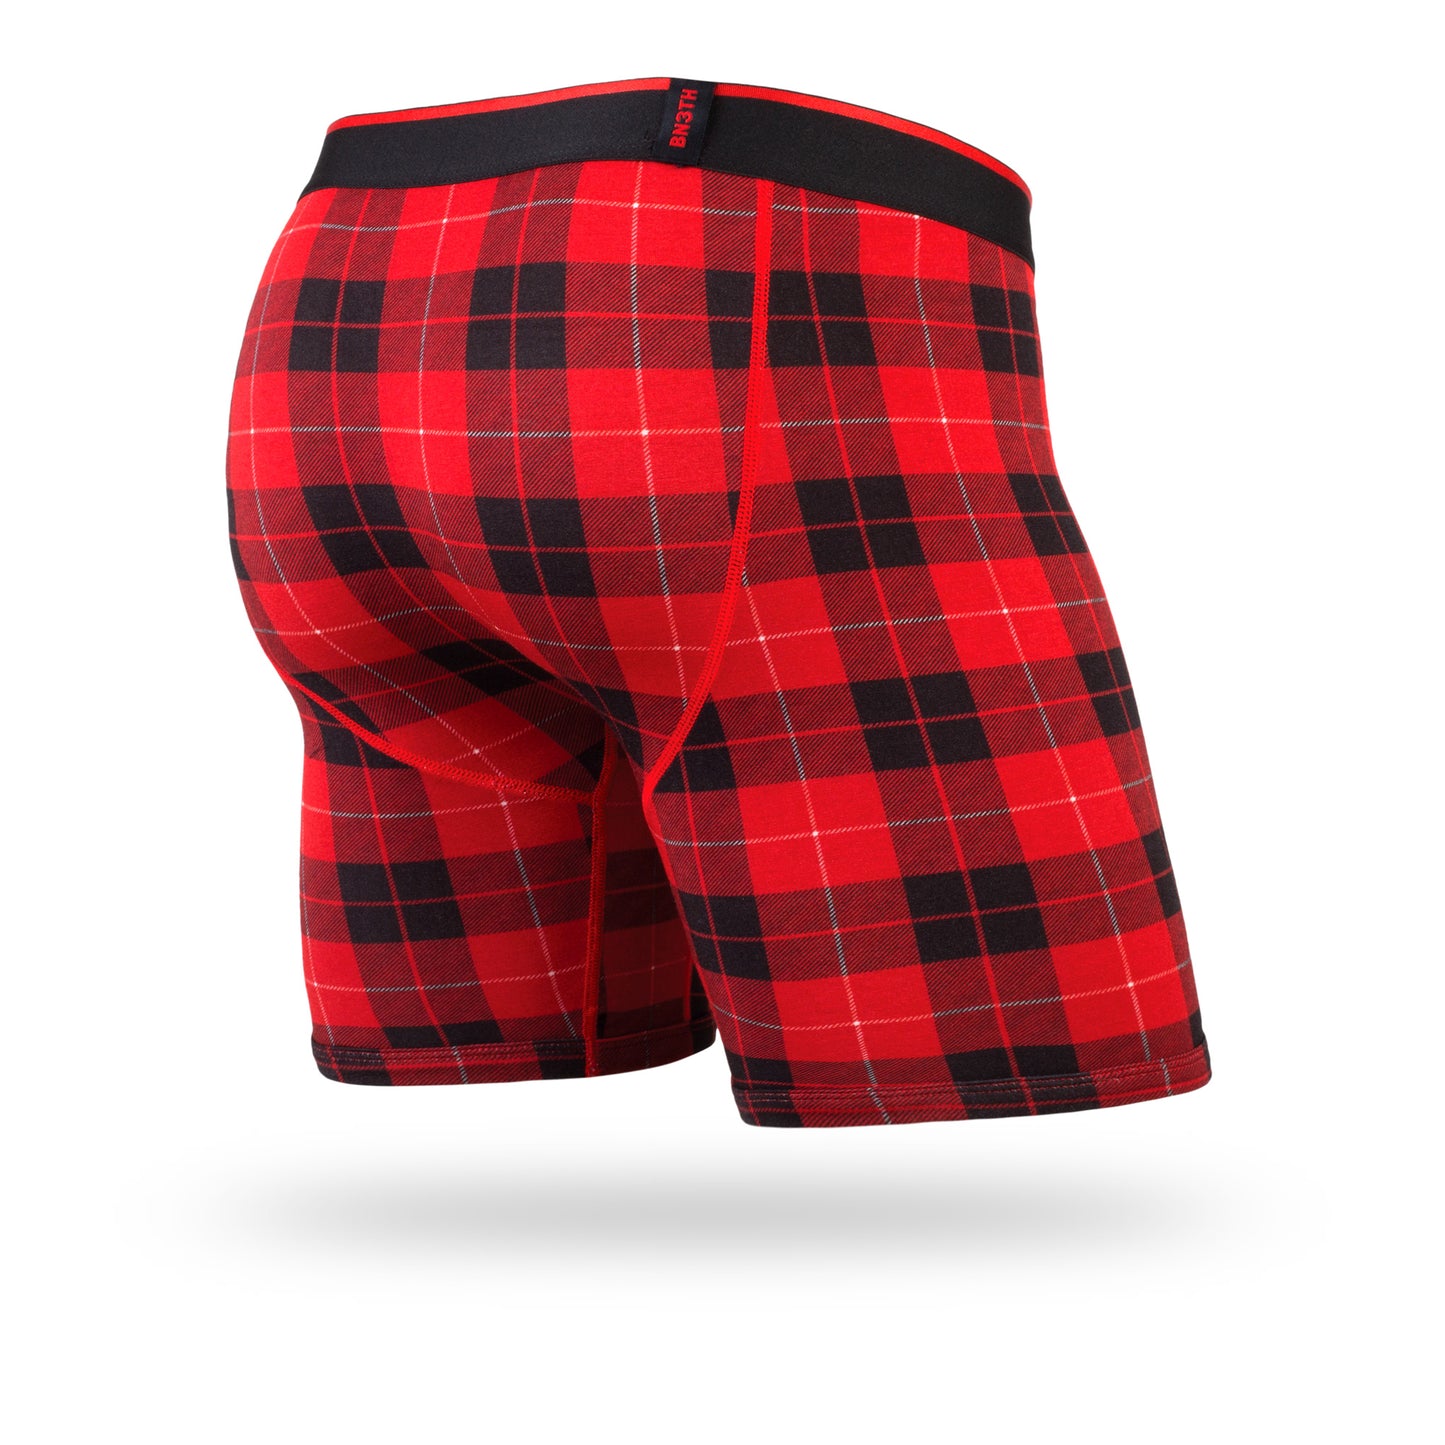 BN3TH MEN'S CLASSIC BOXER BRIEF: FIRESIDE PLAID RED